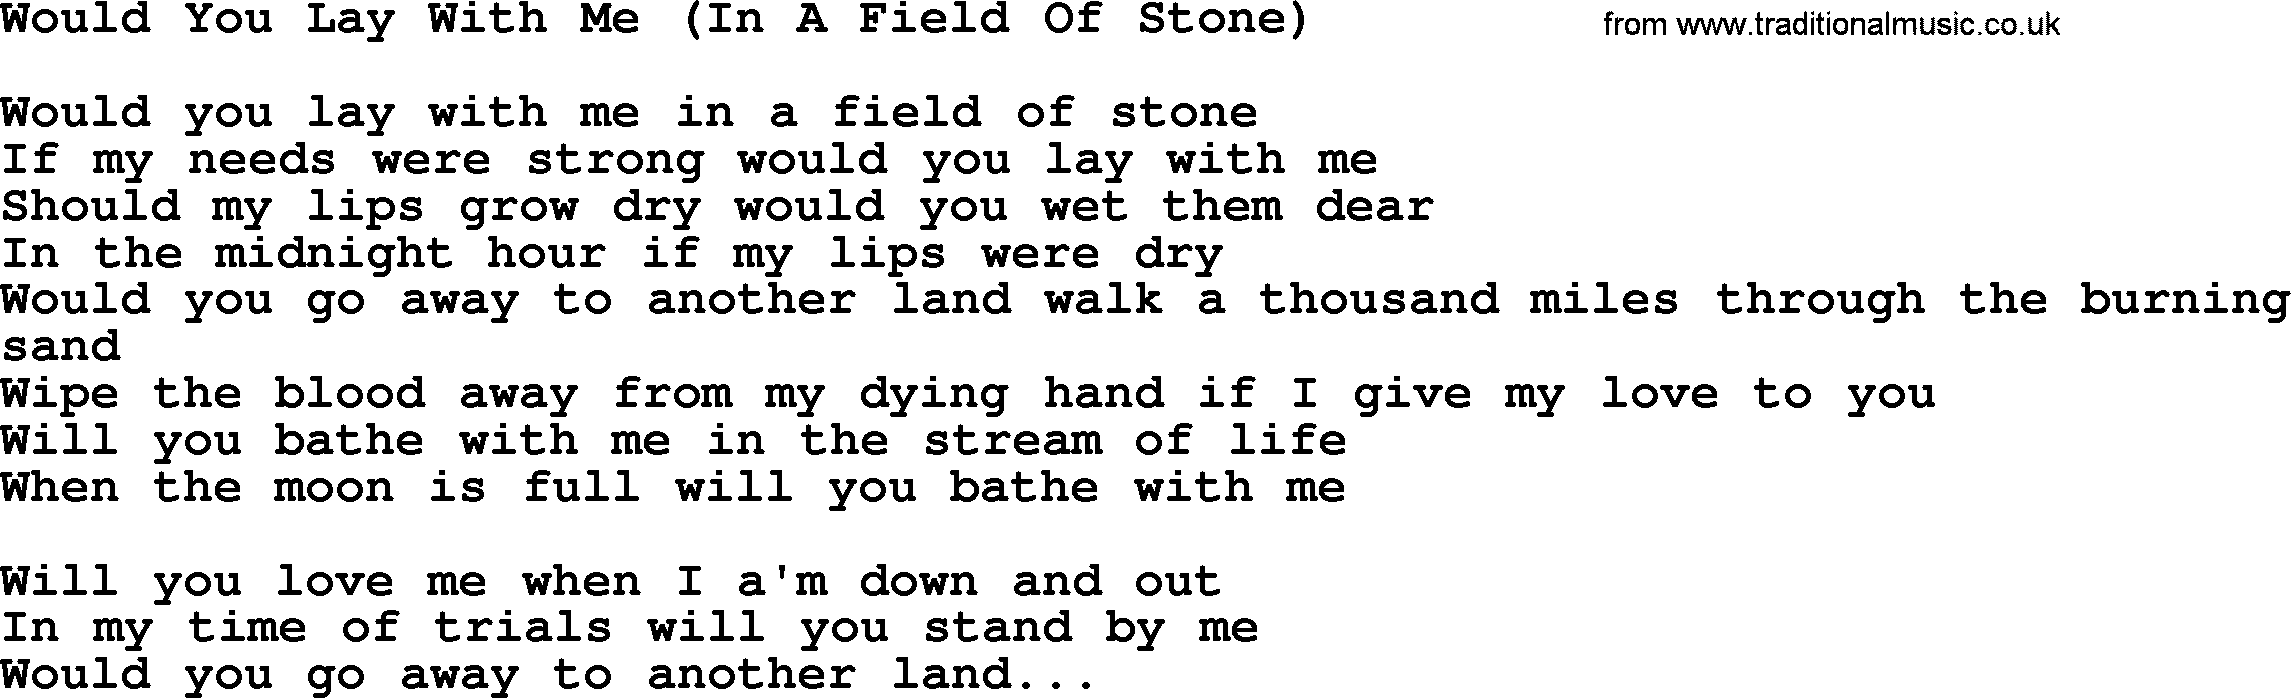 Willie Nelson song: Would You Lay With Me (In A Field Of Stone) lyrics